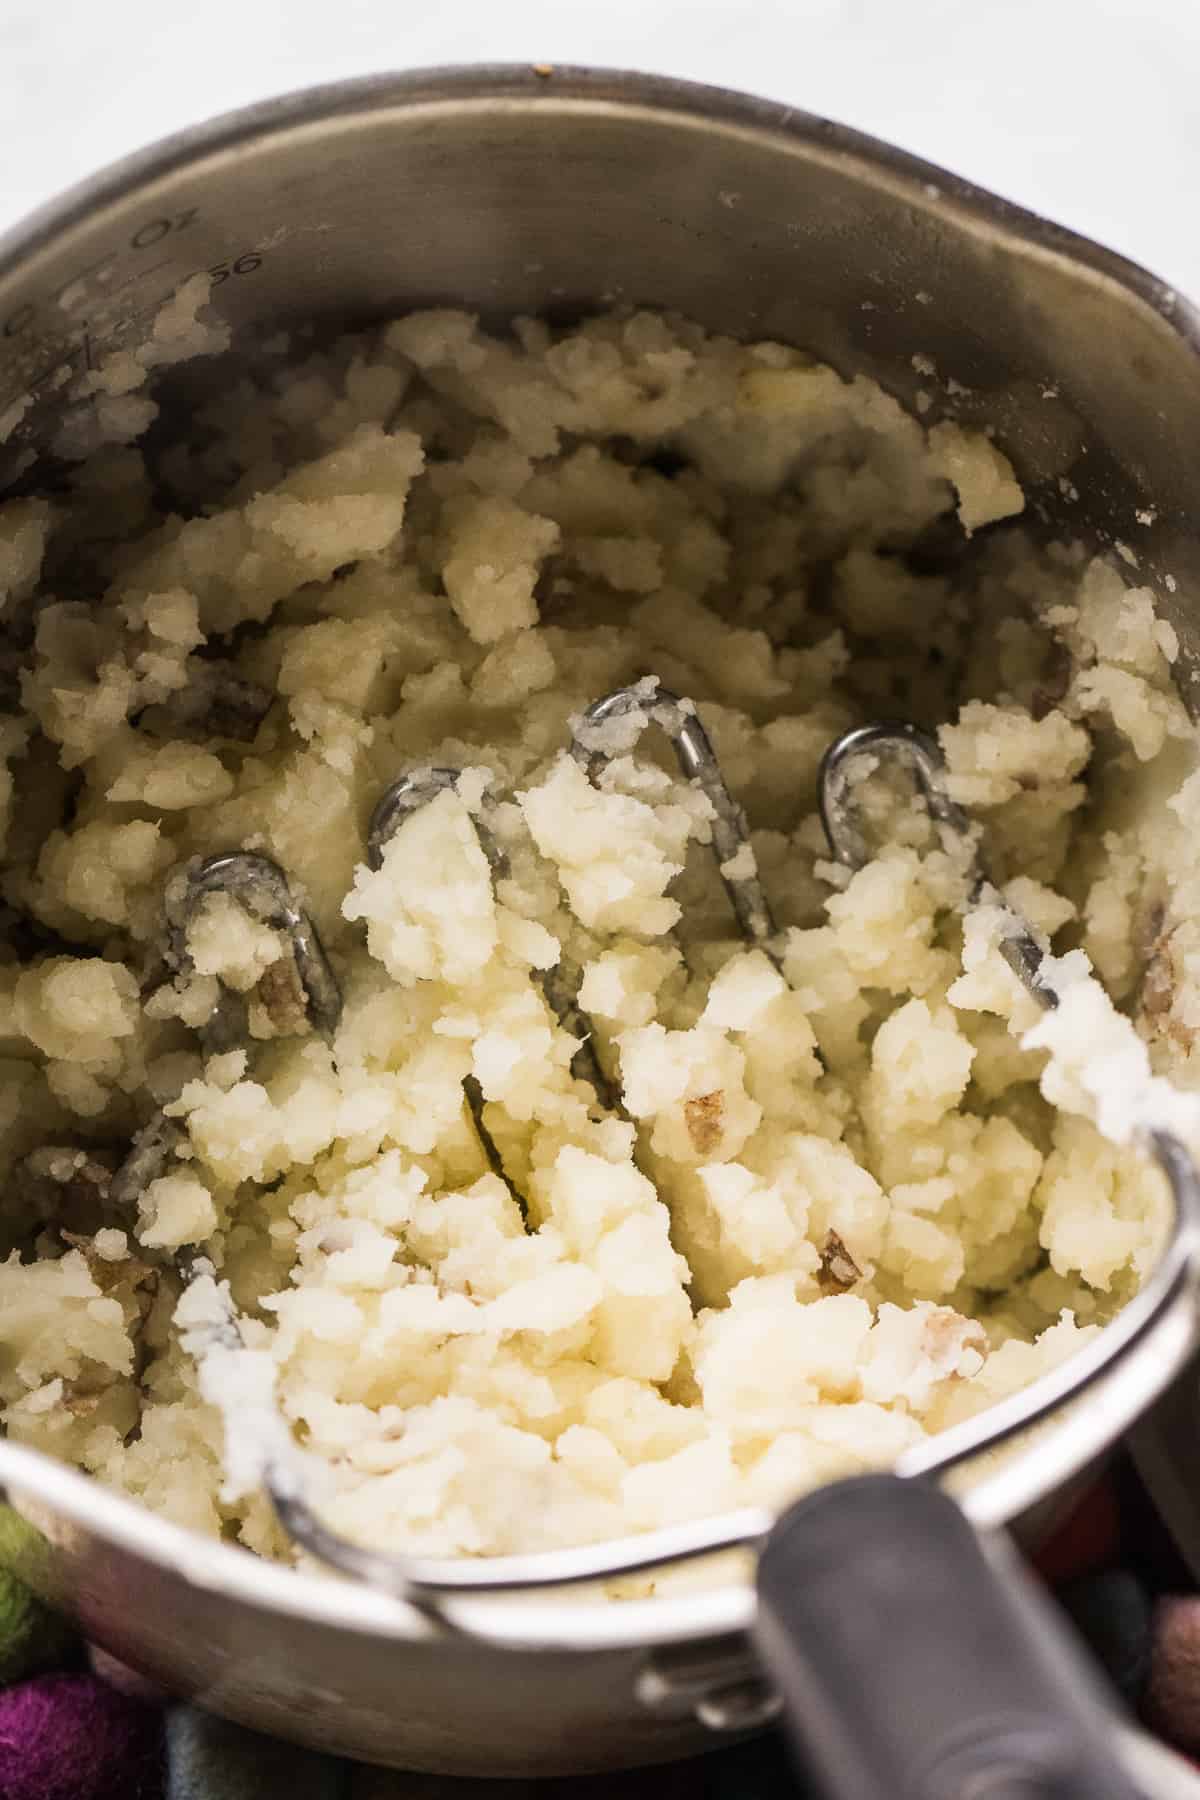 Mashed potatoes in a small pot.